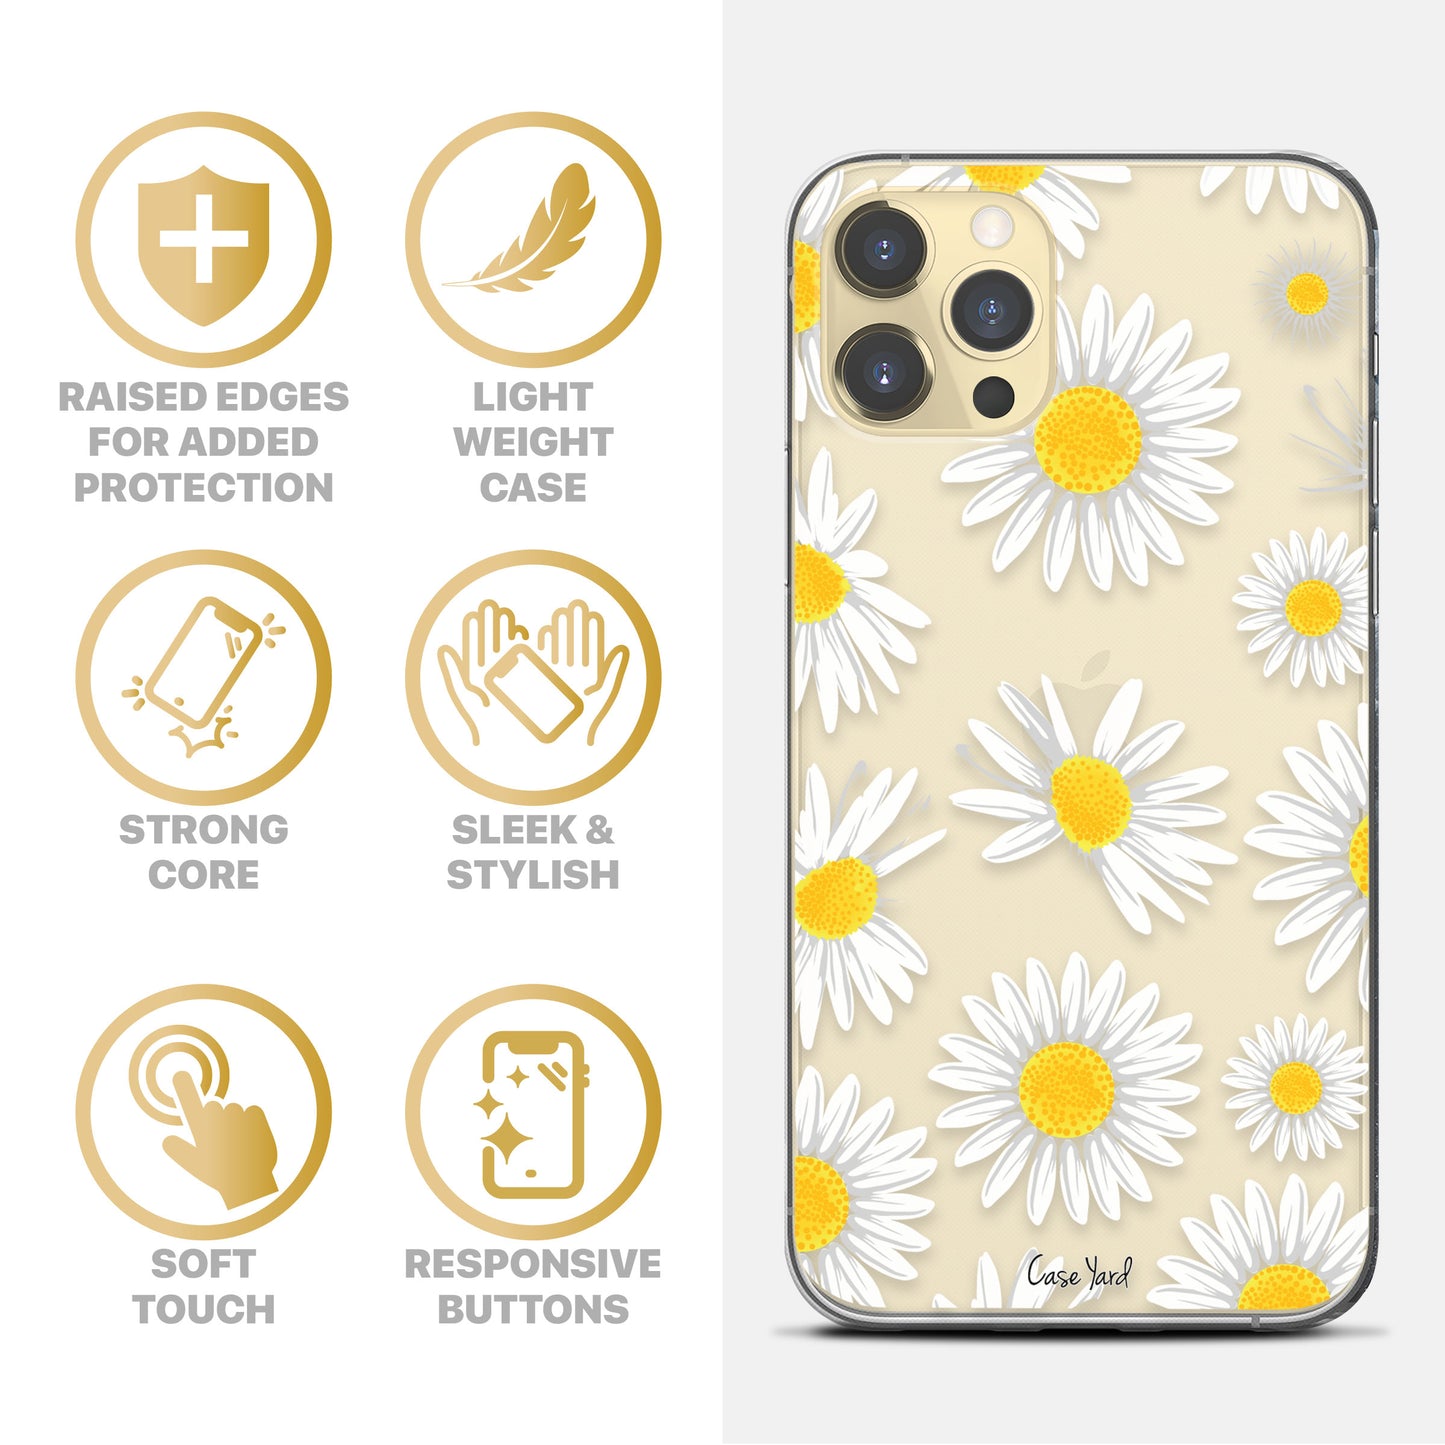 TPU Case Clear case with (Daisy Wheels) Design for iPhone & Samsung Phones